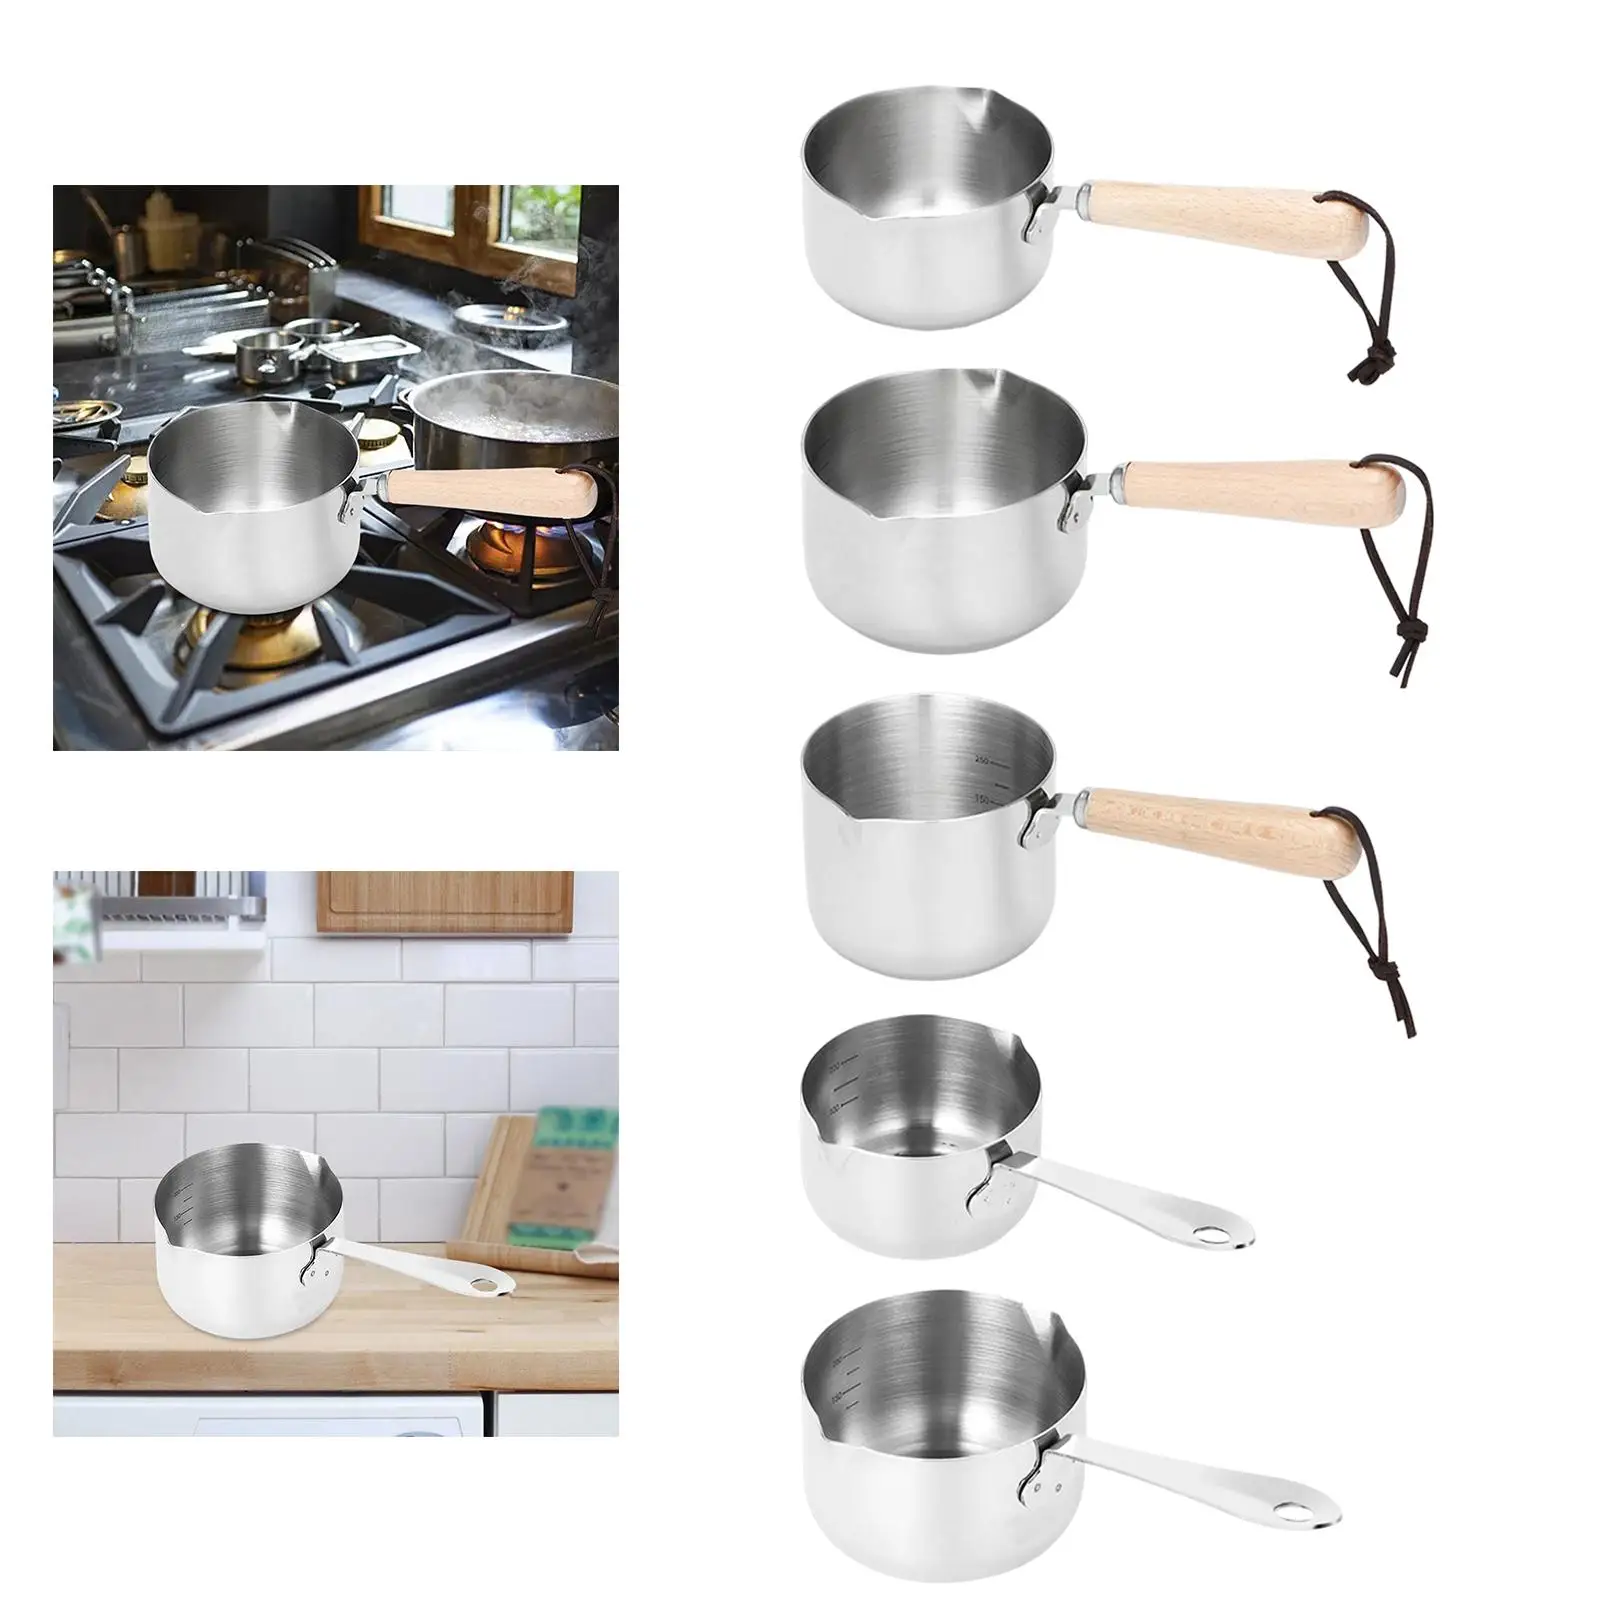 Stainless Steel Cooking Pots Butter Warmer Cookware Saucepan Soup Pot for RV Kitchen Camping